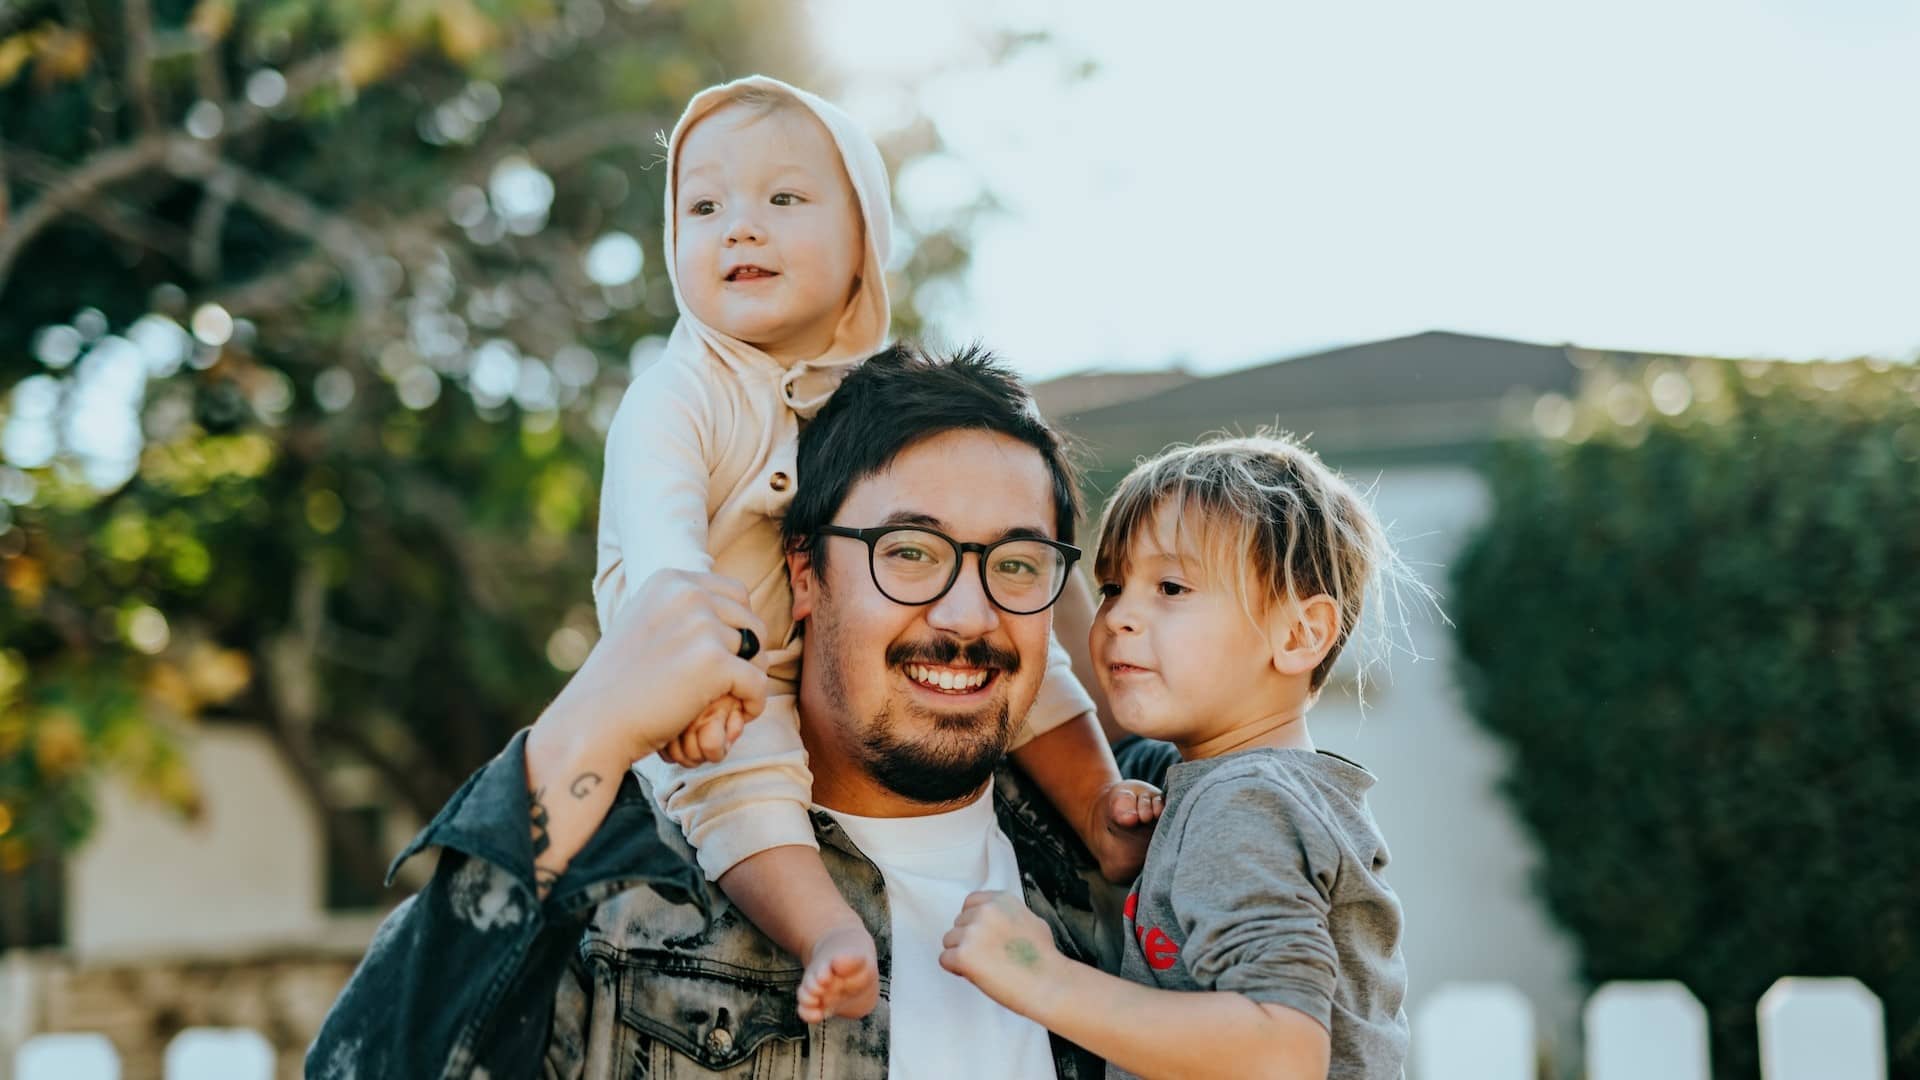 Image: A man with his two children, one child on his shoulders and the other in his arms, looking directly into the camera.